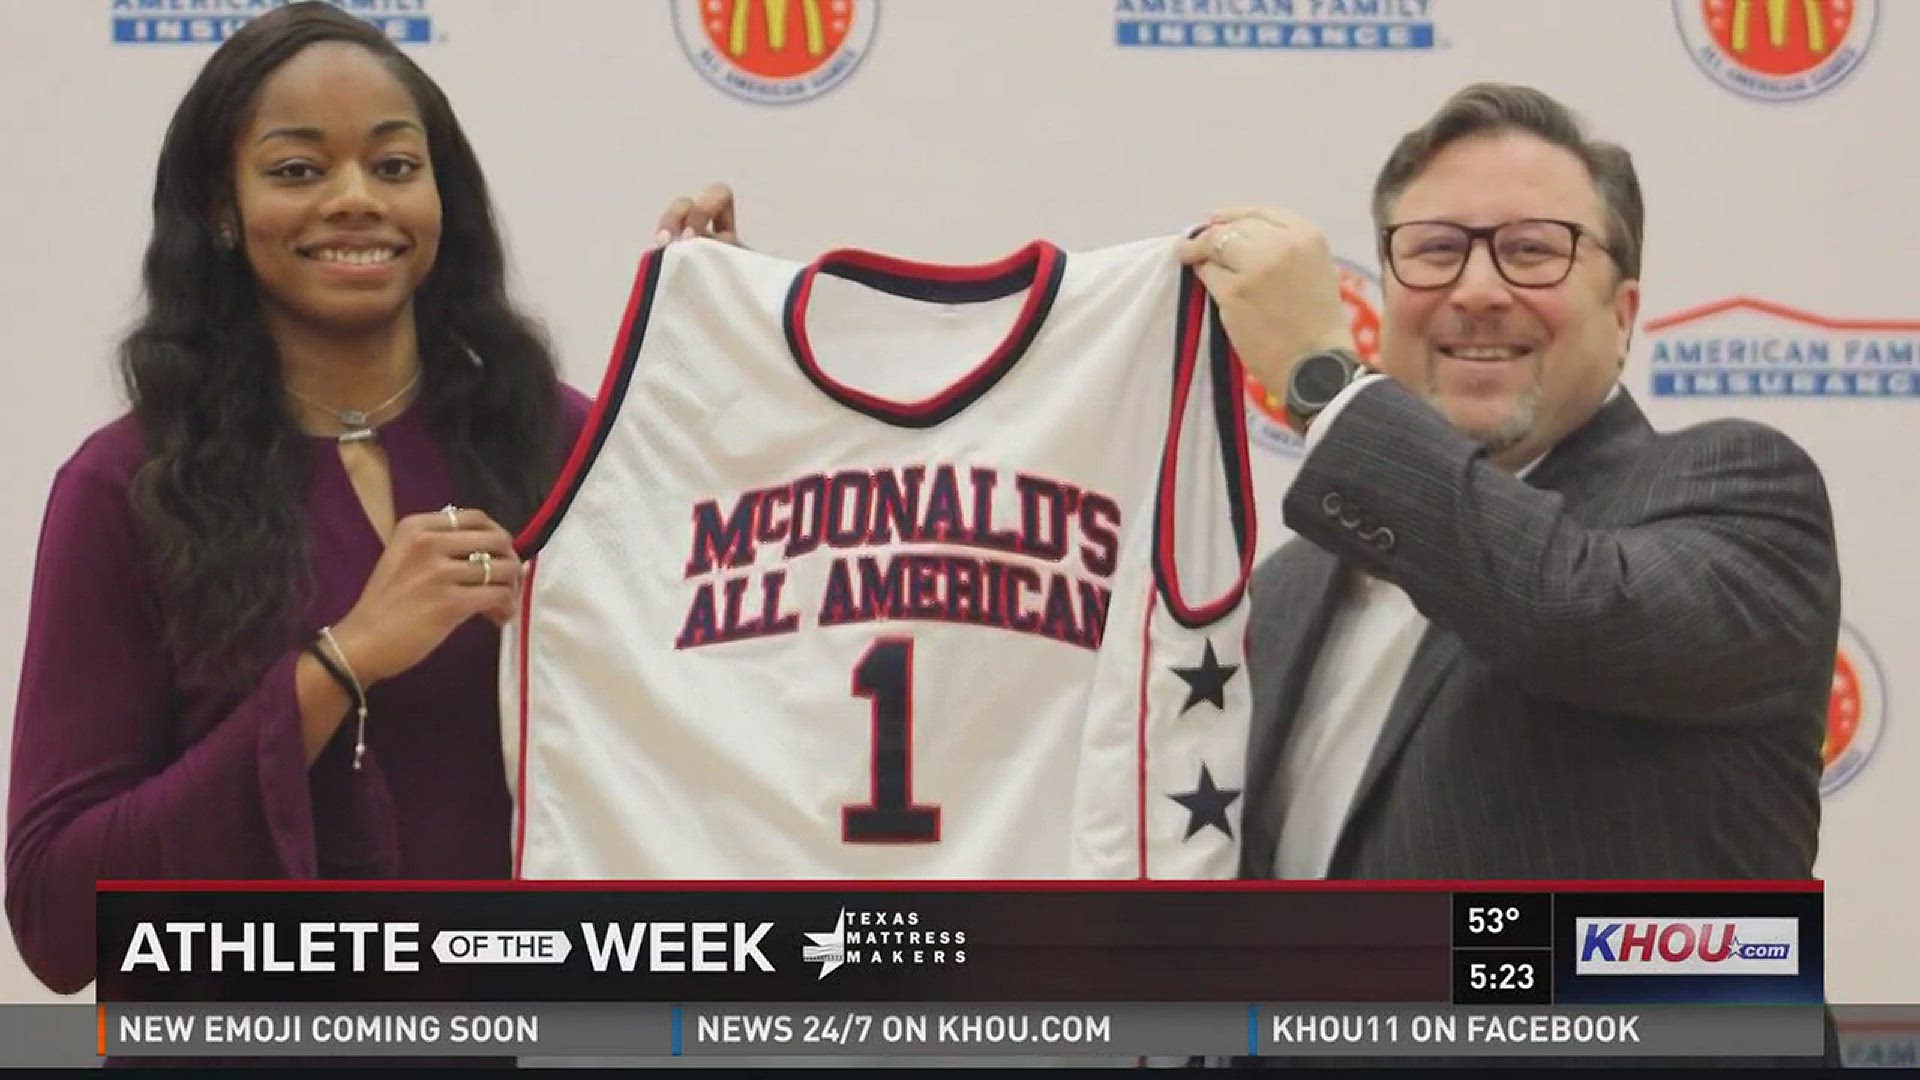 Charli Collier, who plays basketball for Barbers Hill, is our Athlete of the Week. Charli has played for Team USA, scored over 3,000 points in her young career and got offered a scholarship to Texas in the 8th grade. Just this week, she was named a McDona